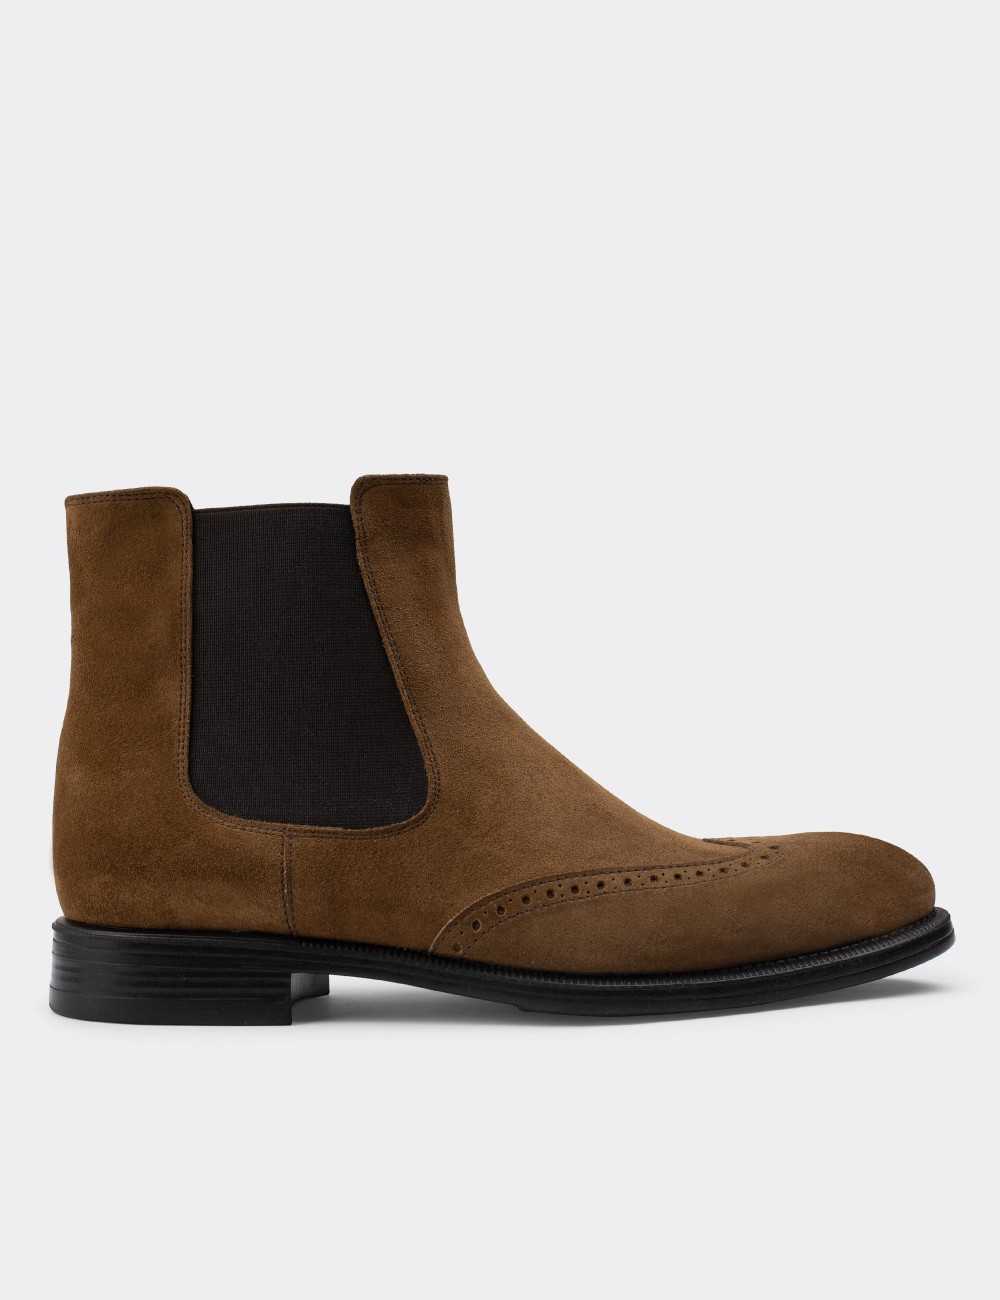 Tan Suede Leather Chelsea Boots - 01848MTBAC01